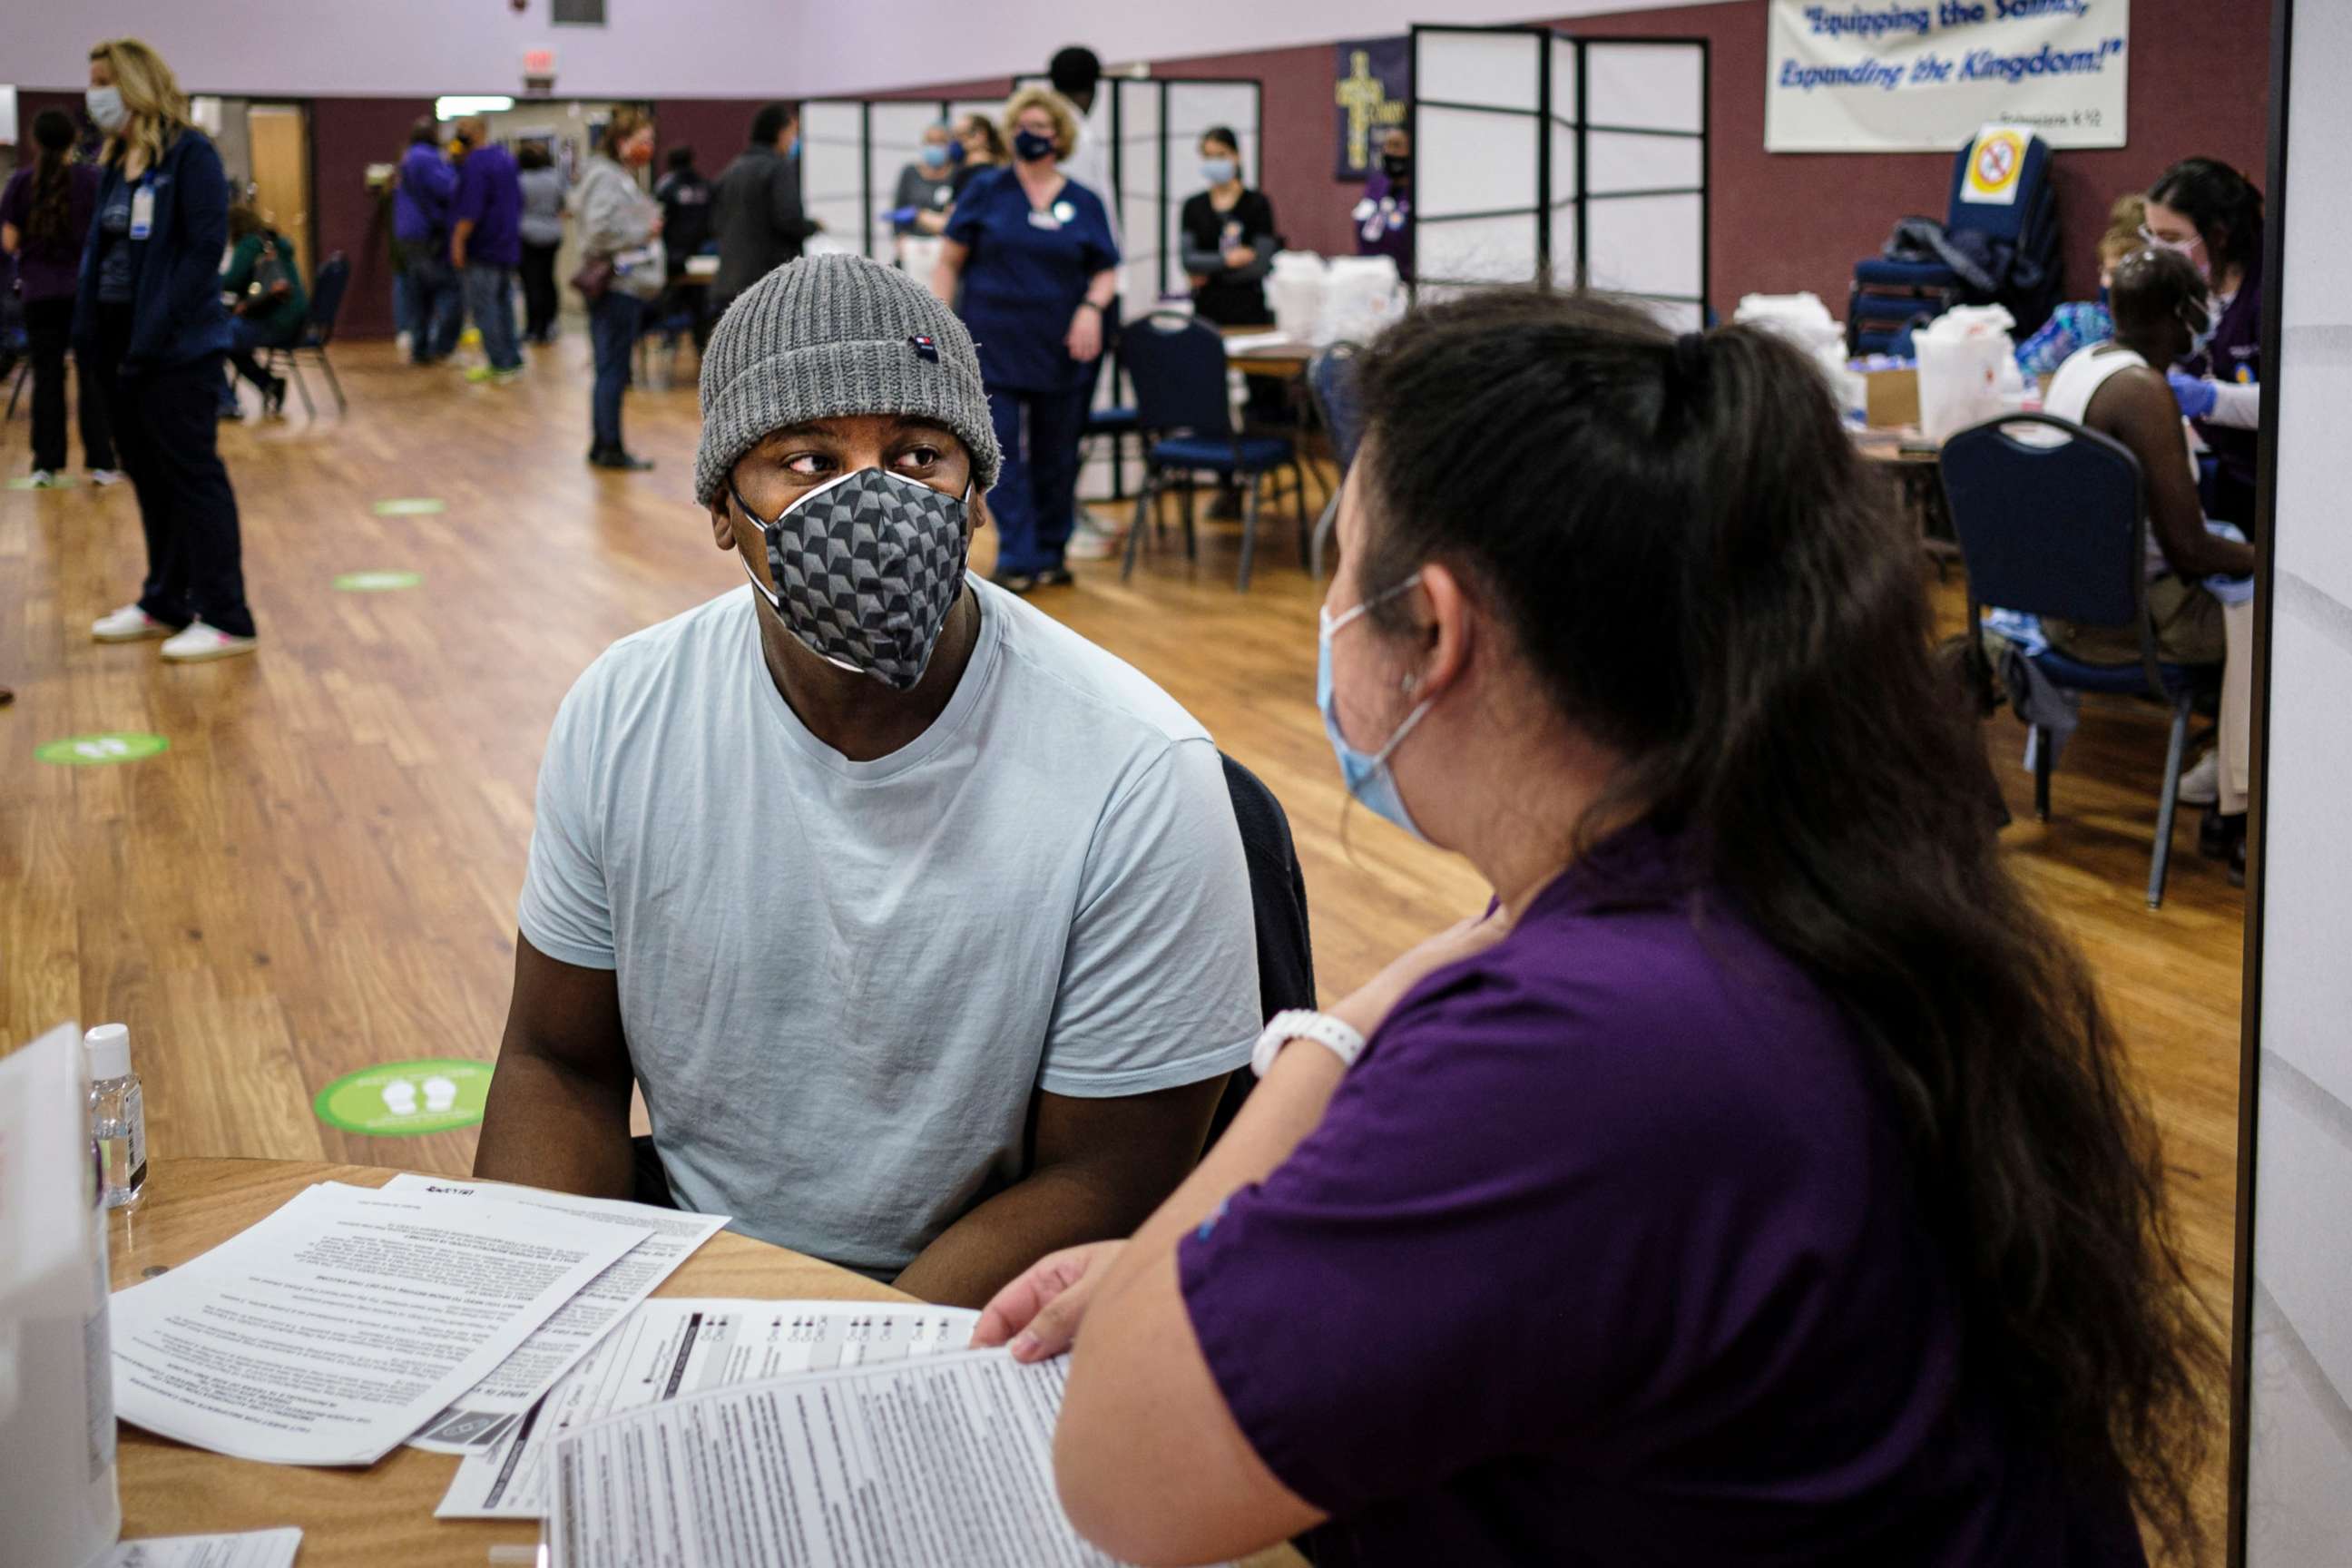 PHOTO: Justin Pinkney talks to a nursing student about the COVID-19 vaccination he is about to get during a COVID-19 vaccination clinic at Corinthian Baptist Church in Des Moines, Iowa, March 27, 2021.